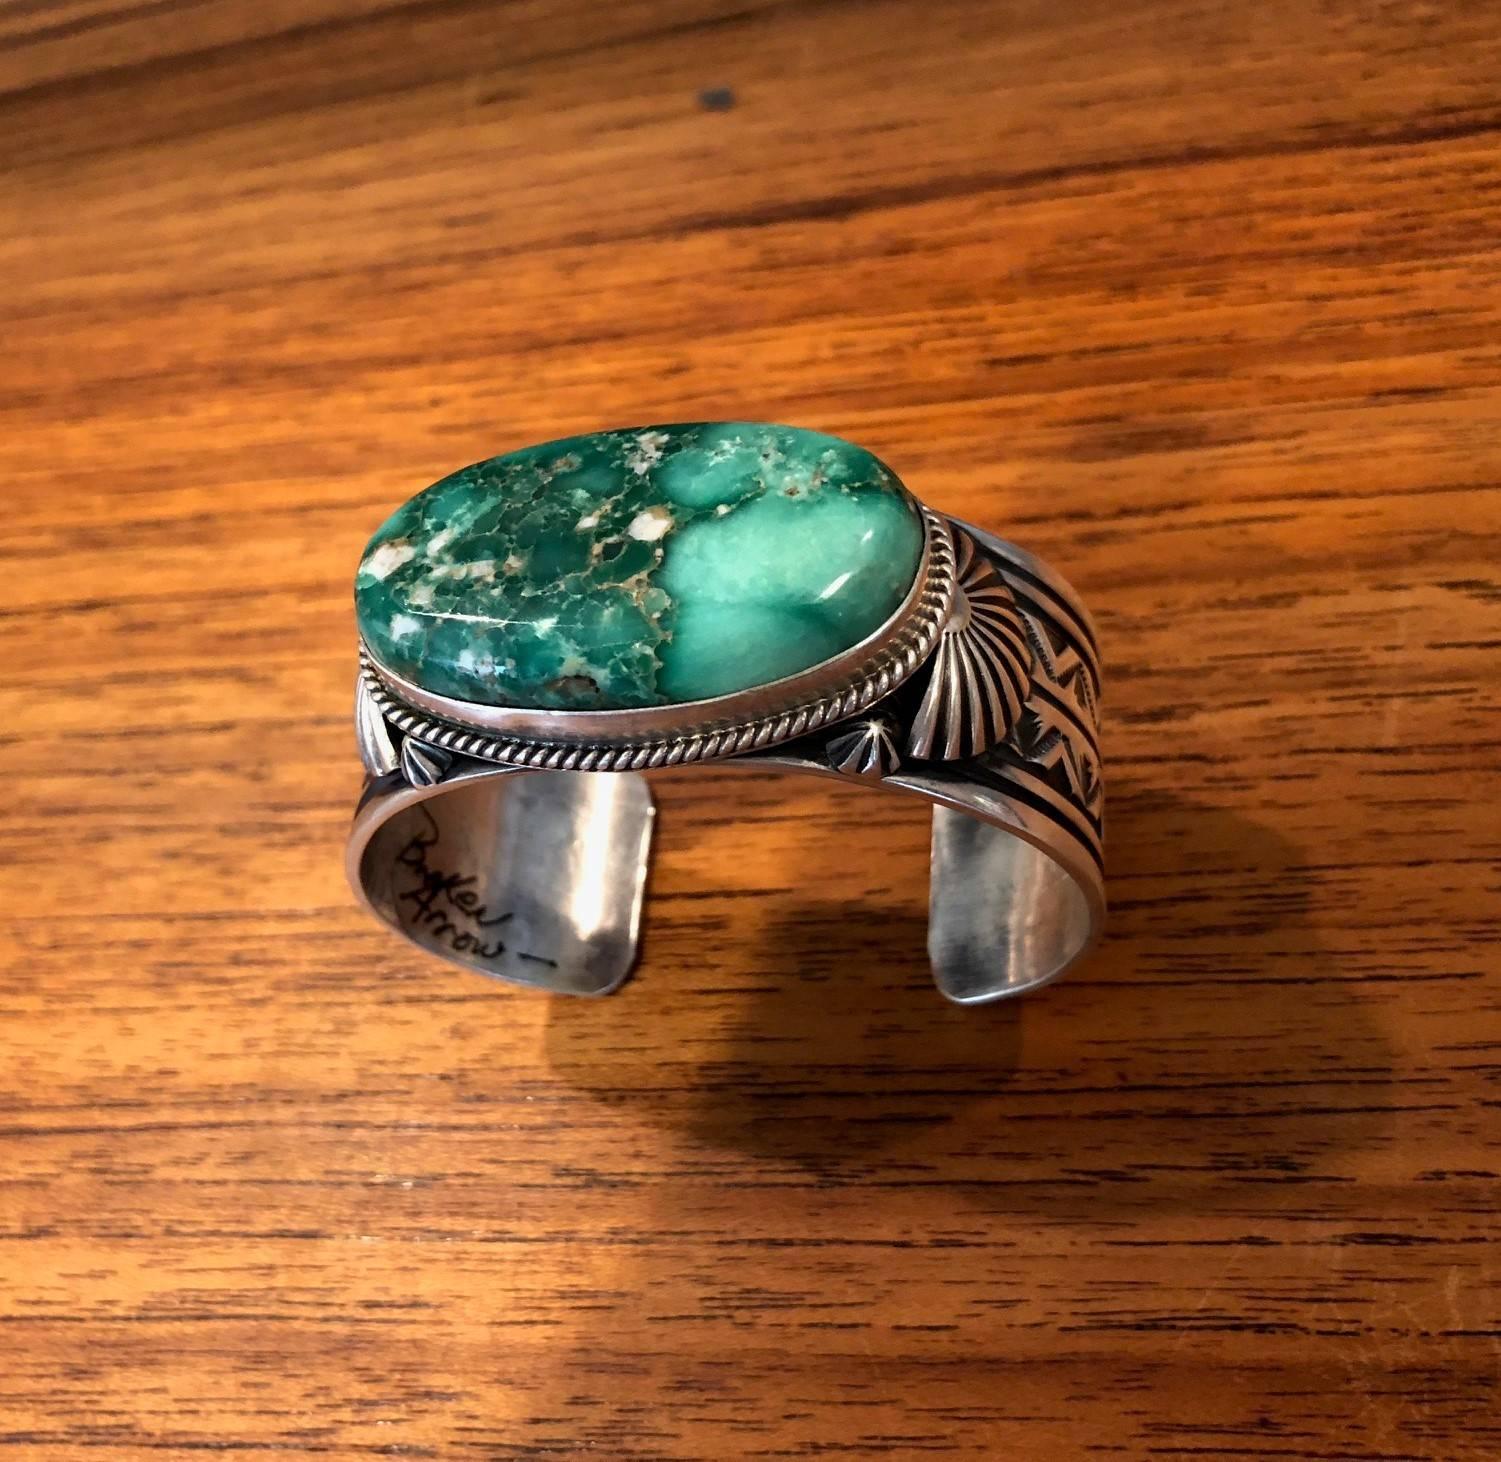 This fabulous cuff bracelet is handmade by Navajo silversmith Delbert Gordon featuring a rare green variquoise turquoise spider web slab stone from the Broken Arrow Mine in Nevada.

The bracelet is gorgeous, heavy and solid made of sterling silver